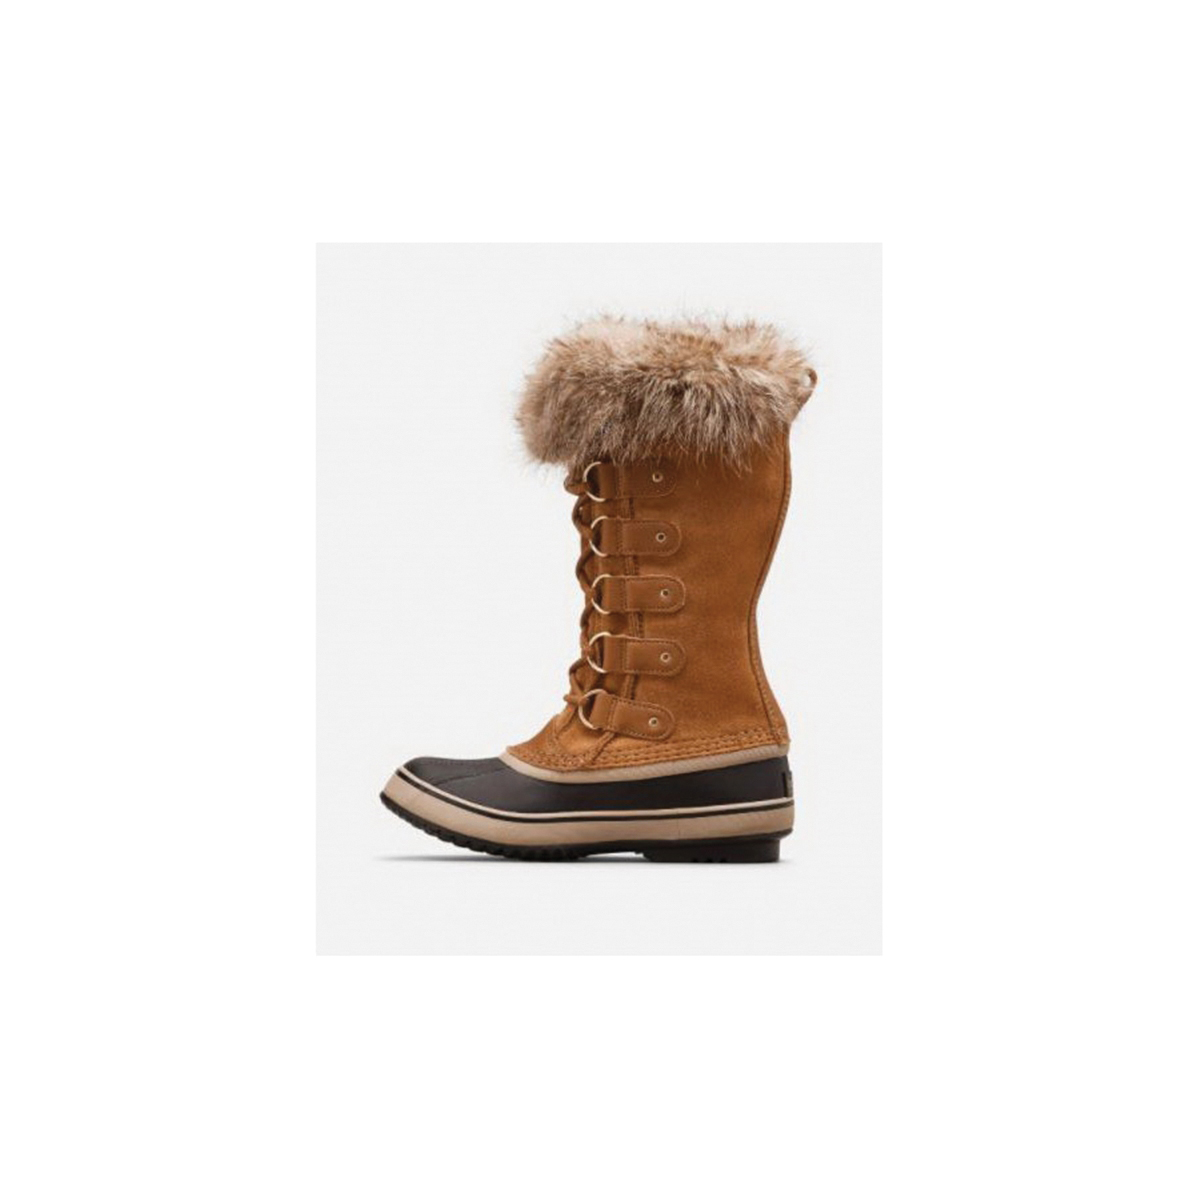 Sorel Joan Of Arctic Series 1855131-224-11 Boots, 11, Black/Camel Brown, Faux Fur/Suede, Lace, Insulated - 4